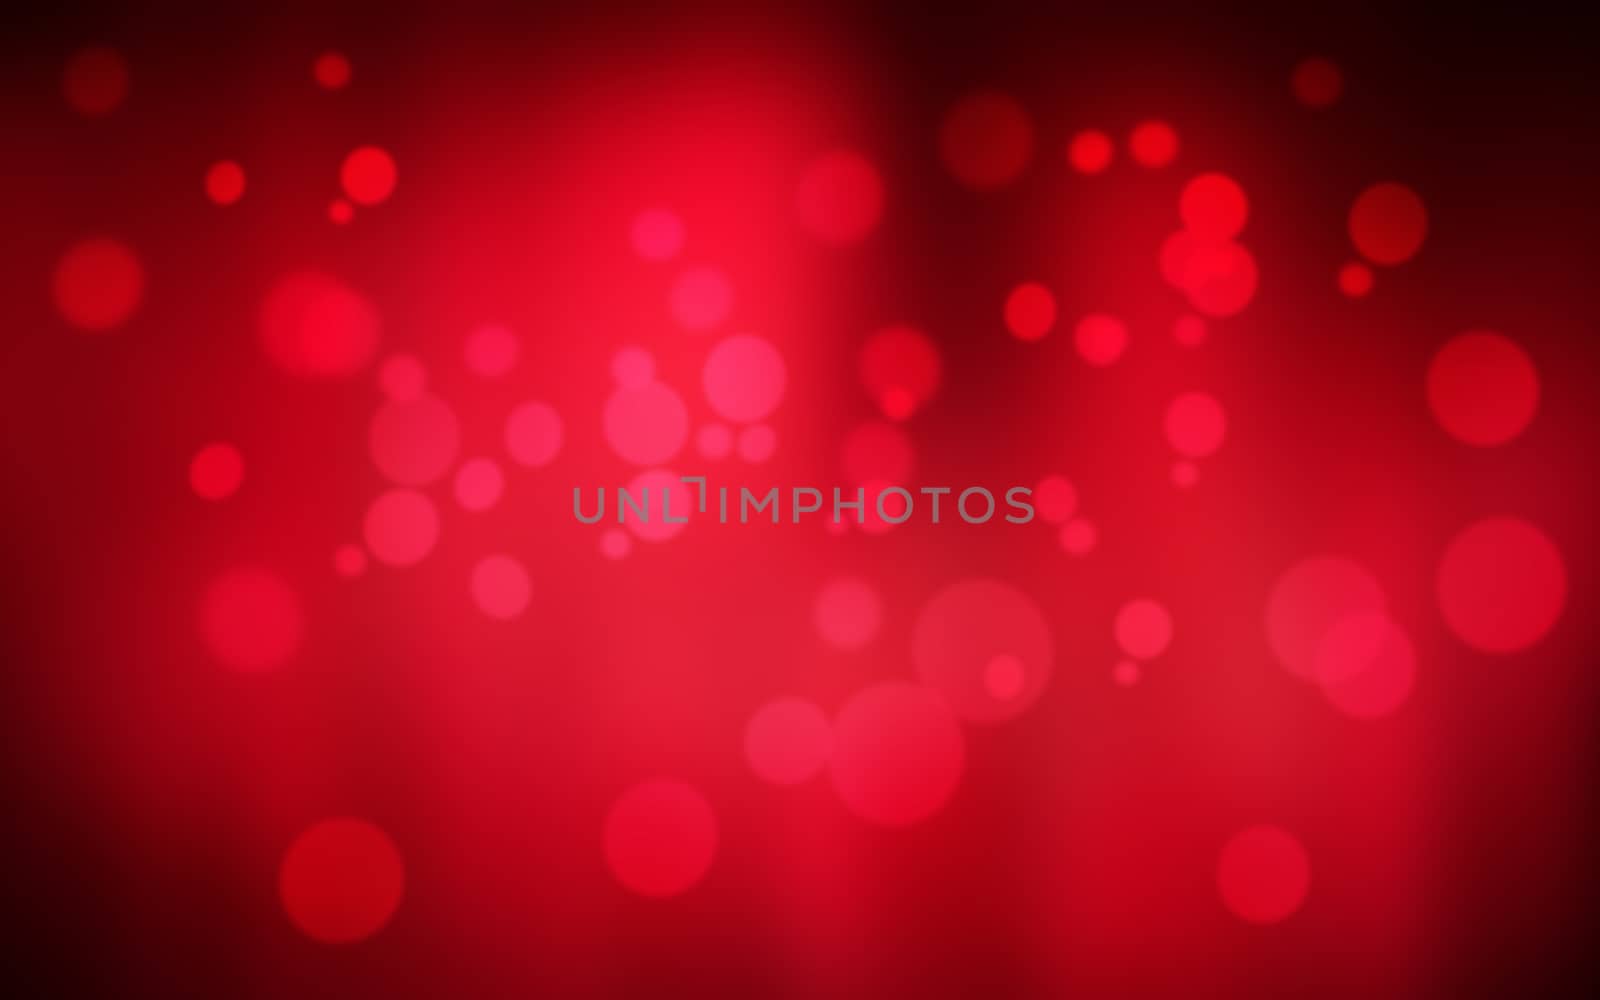 Red holiday bokeh. Abstract Christmas background